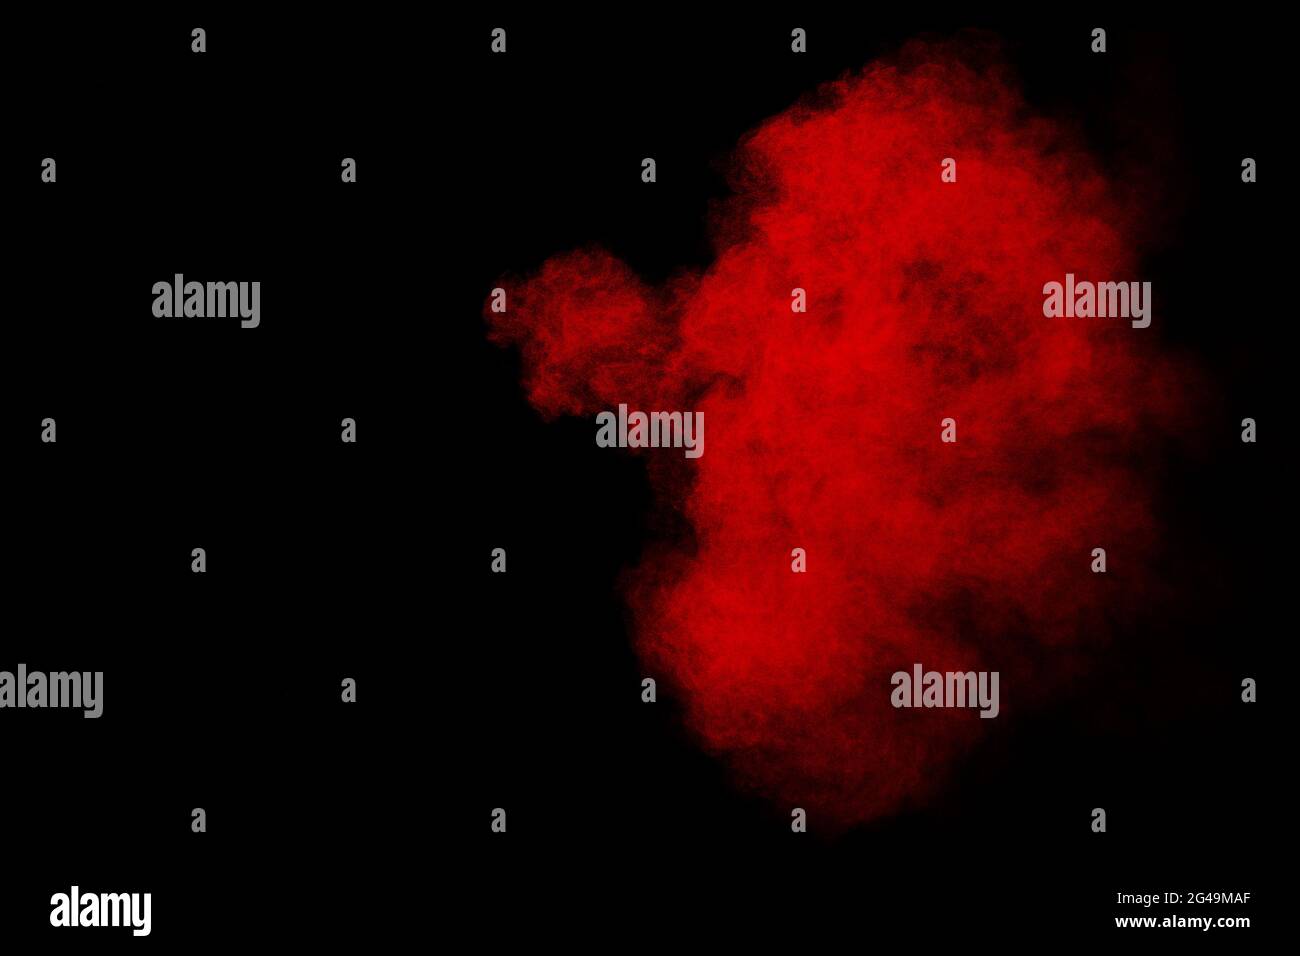 Red powder explosion cloud on black background. Stock Photo